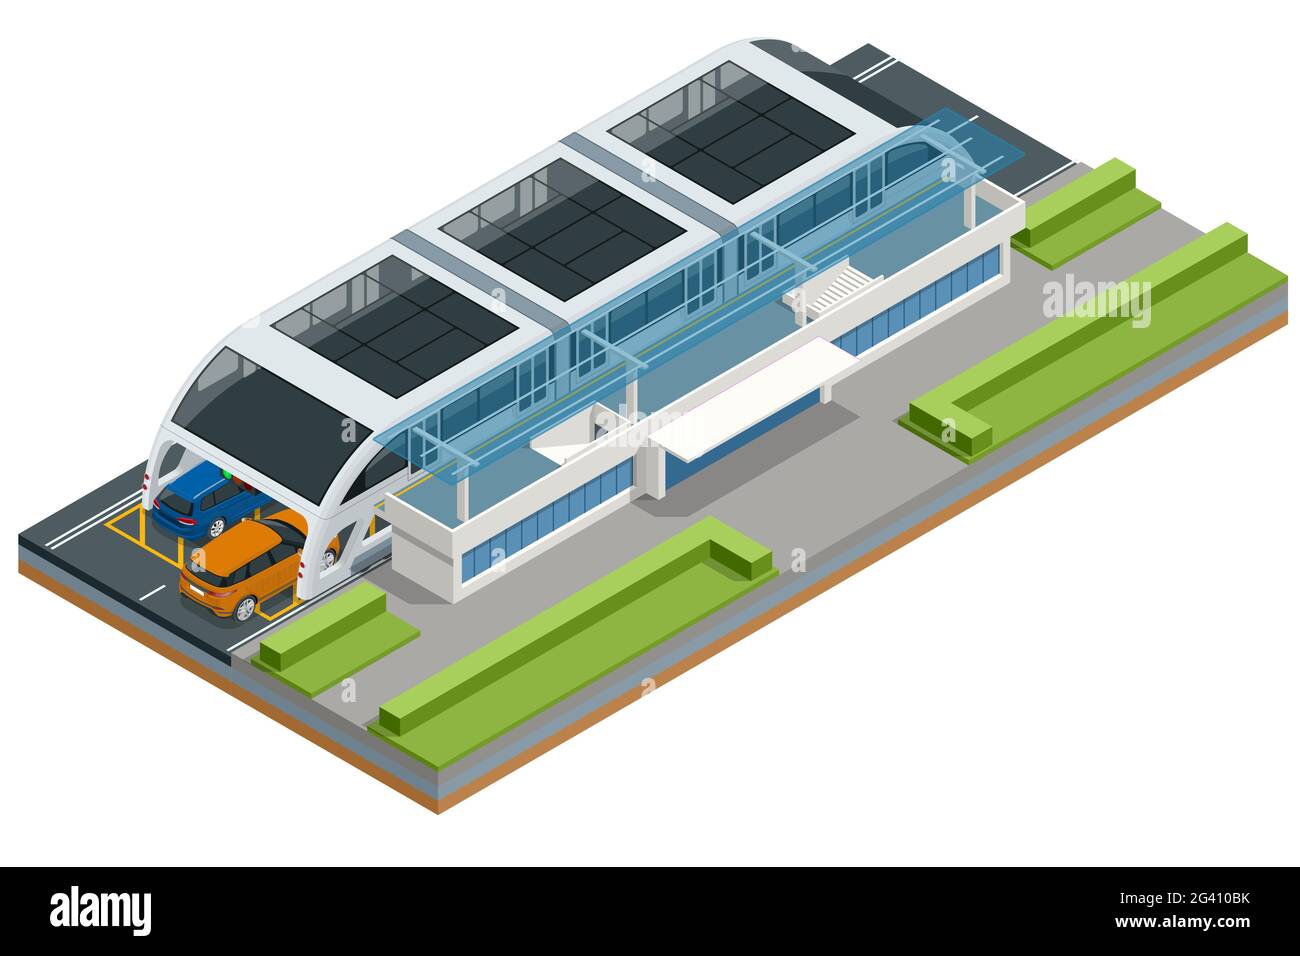 Isometric Transit Elevated Bus in China. Straddling bus, straddle bus, land airbus, or tunnel bus Road vehicle designed to carry many passengers. Stock Vector